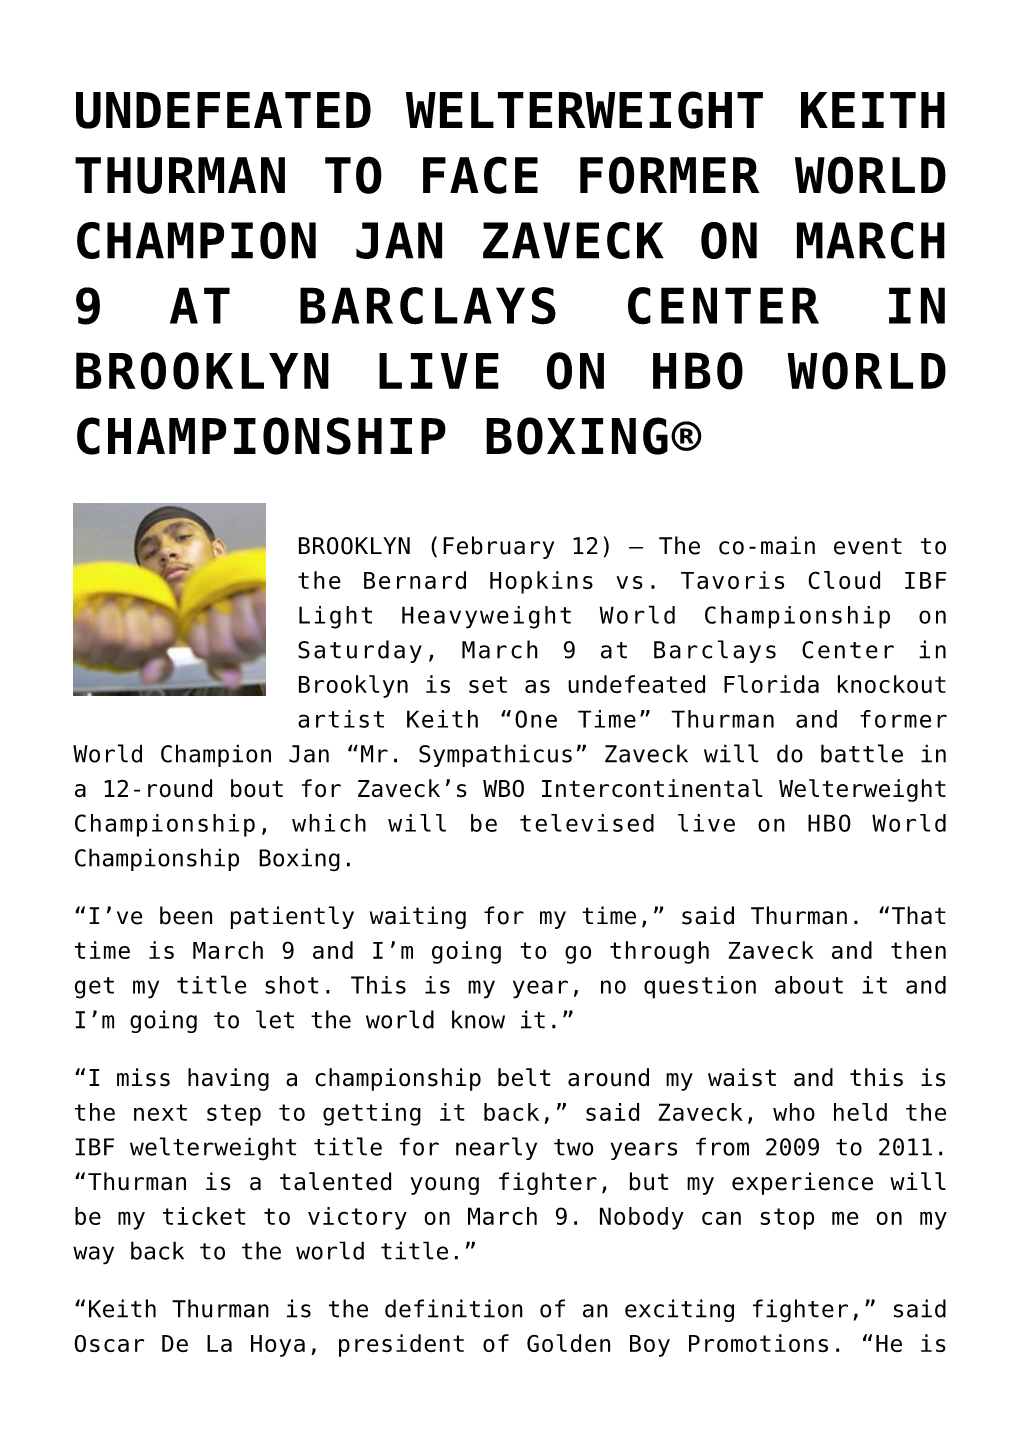 Undefeated Welterweight Keith Thurman to Face Former World Champion Jan Zaveck on March 9 at Barclays Center in Brooklyn Live on Hbo World Championship Boxing®